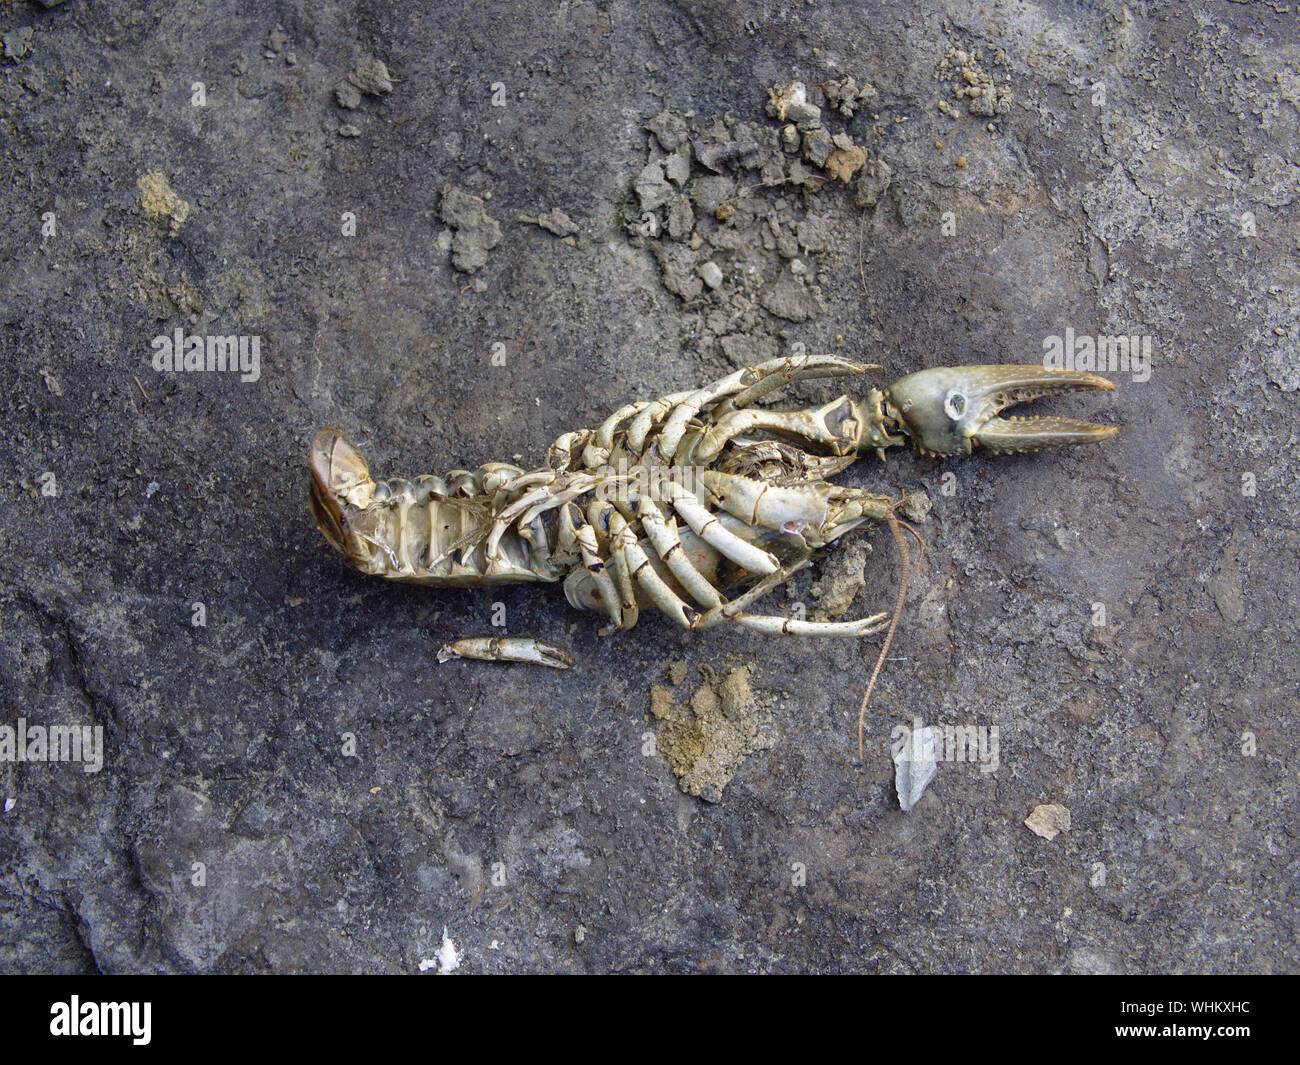 Skeleton of a crayfish (unknown species) lying upside down on a rock with one pincer missing, banks of the Ottawa River, Ottawa, Ontario, Canada. Stock Photo